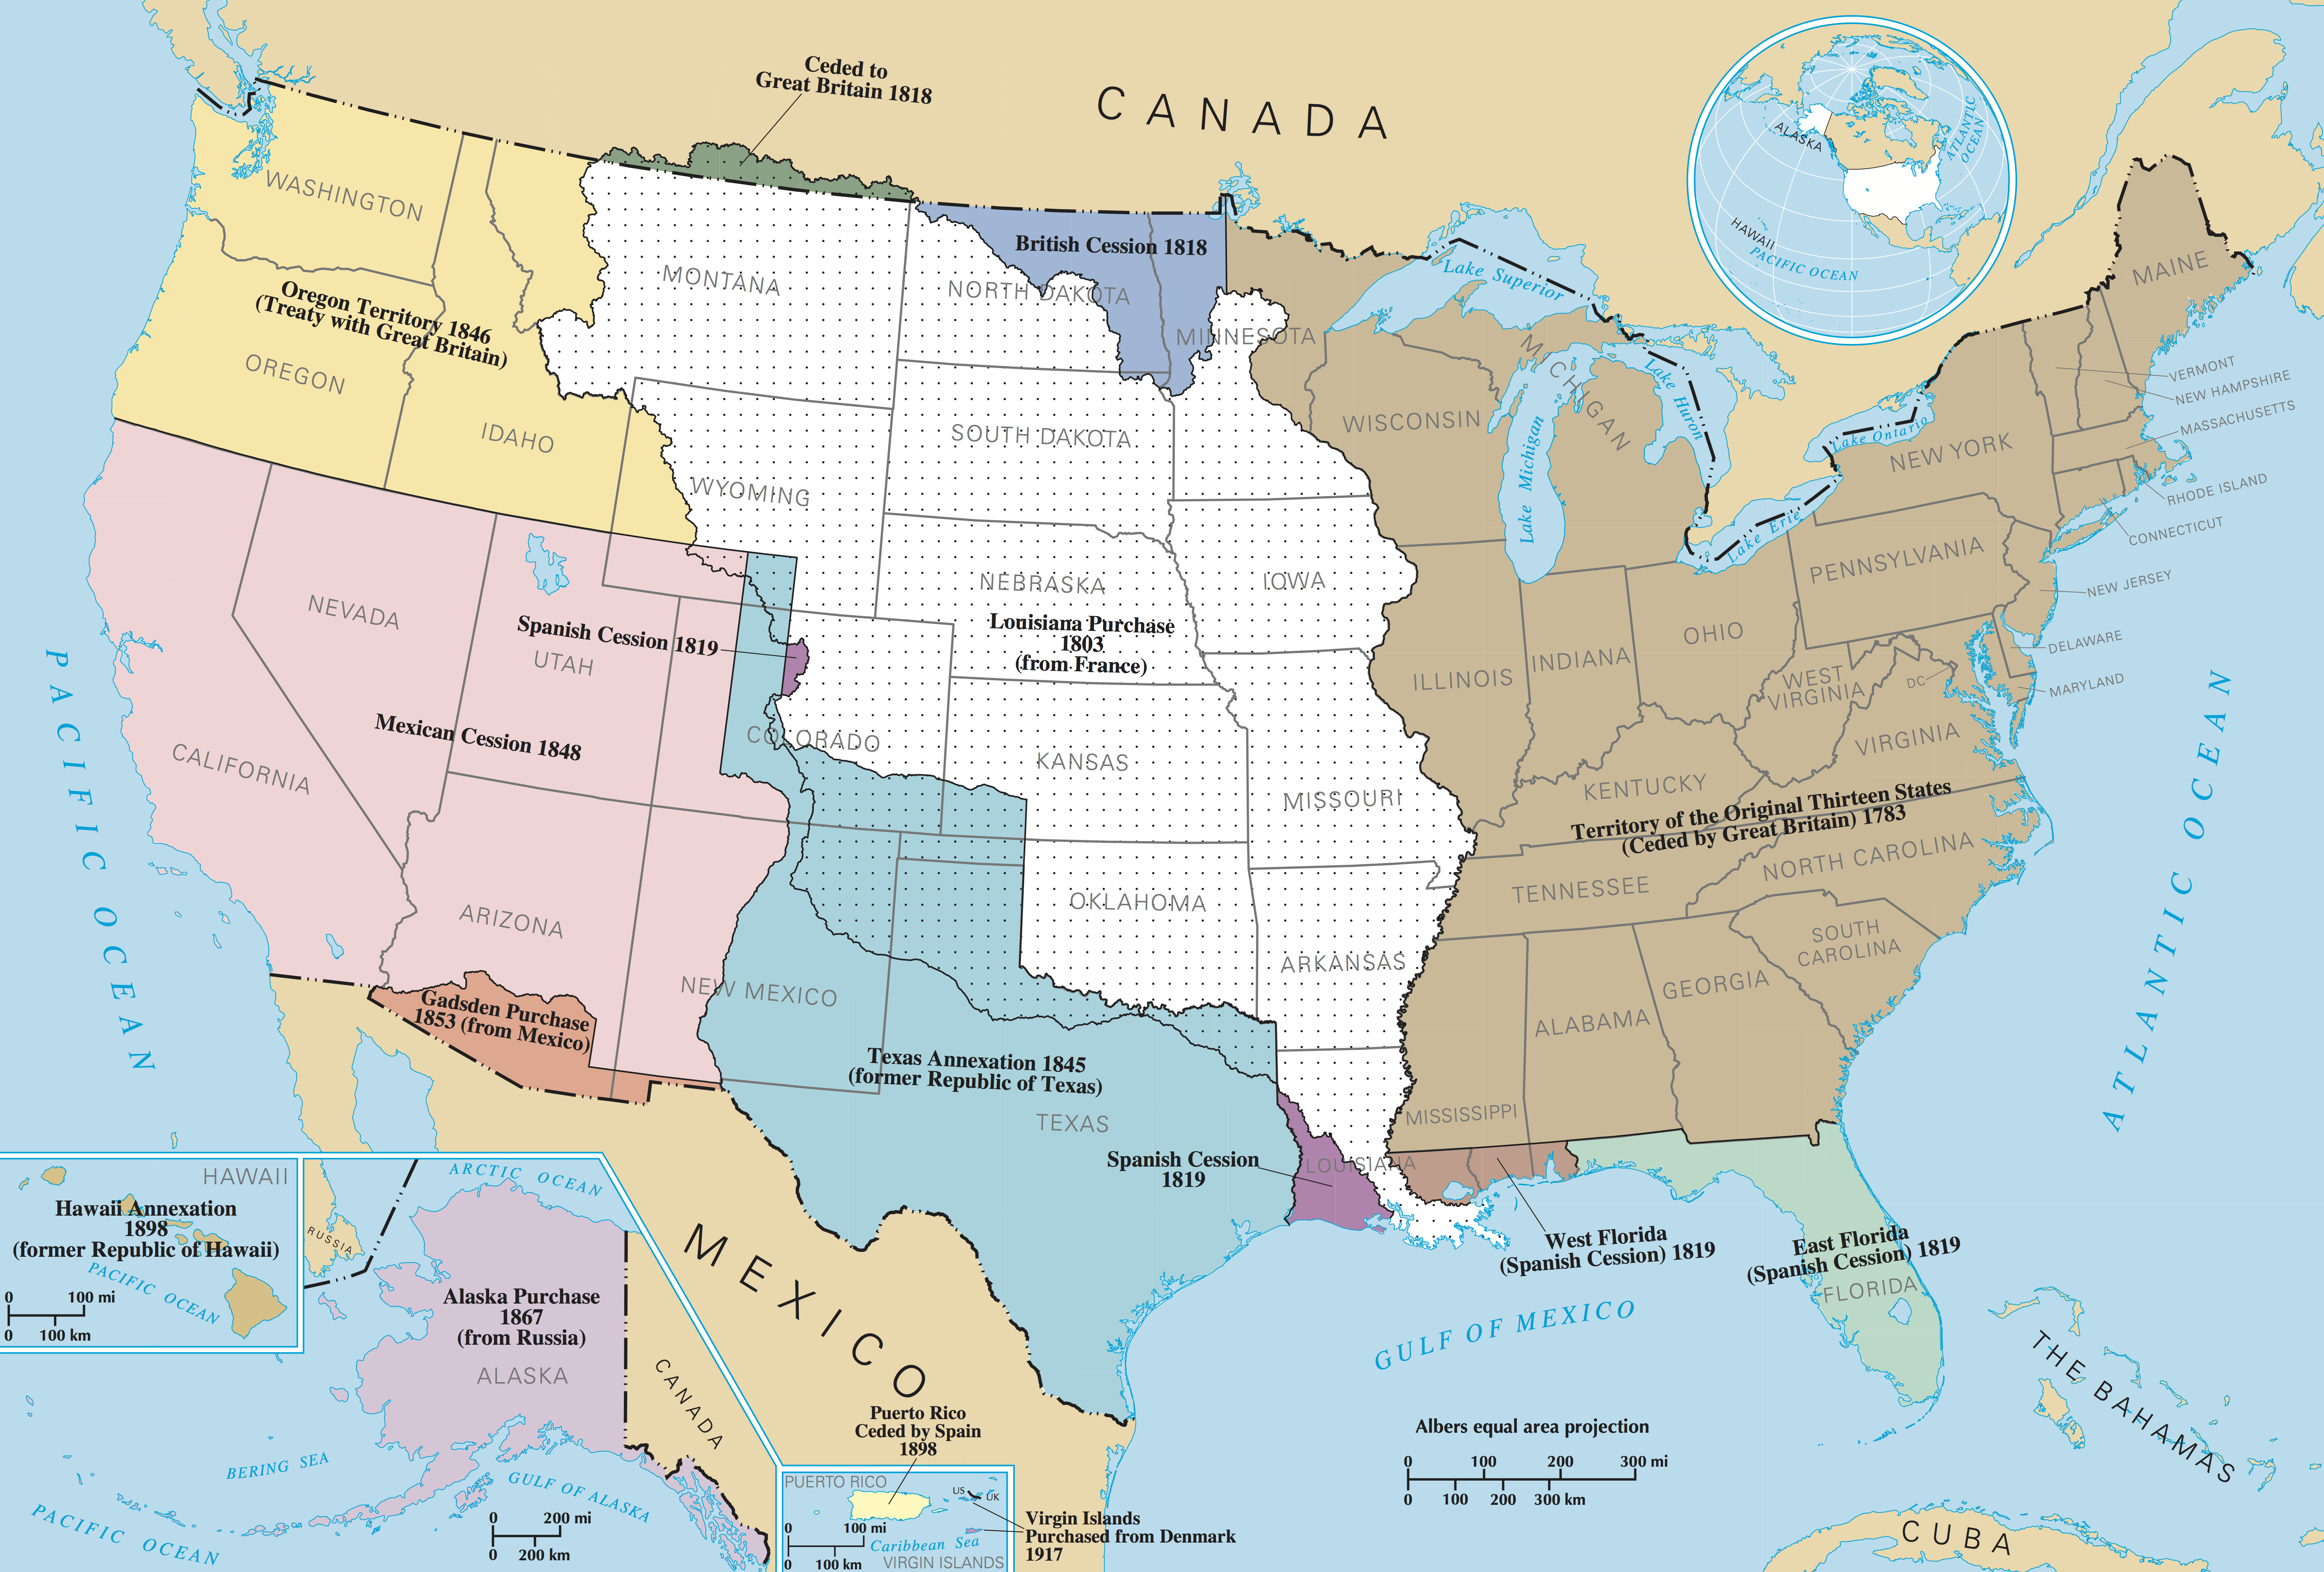 Territorial expansion of the United States with the Louisiana Purchase depicted in white.